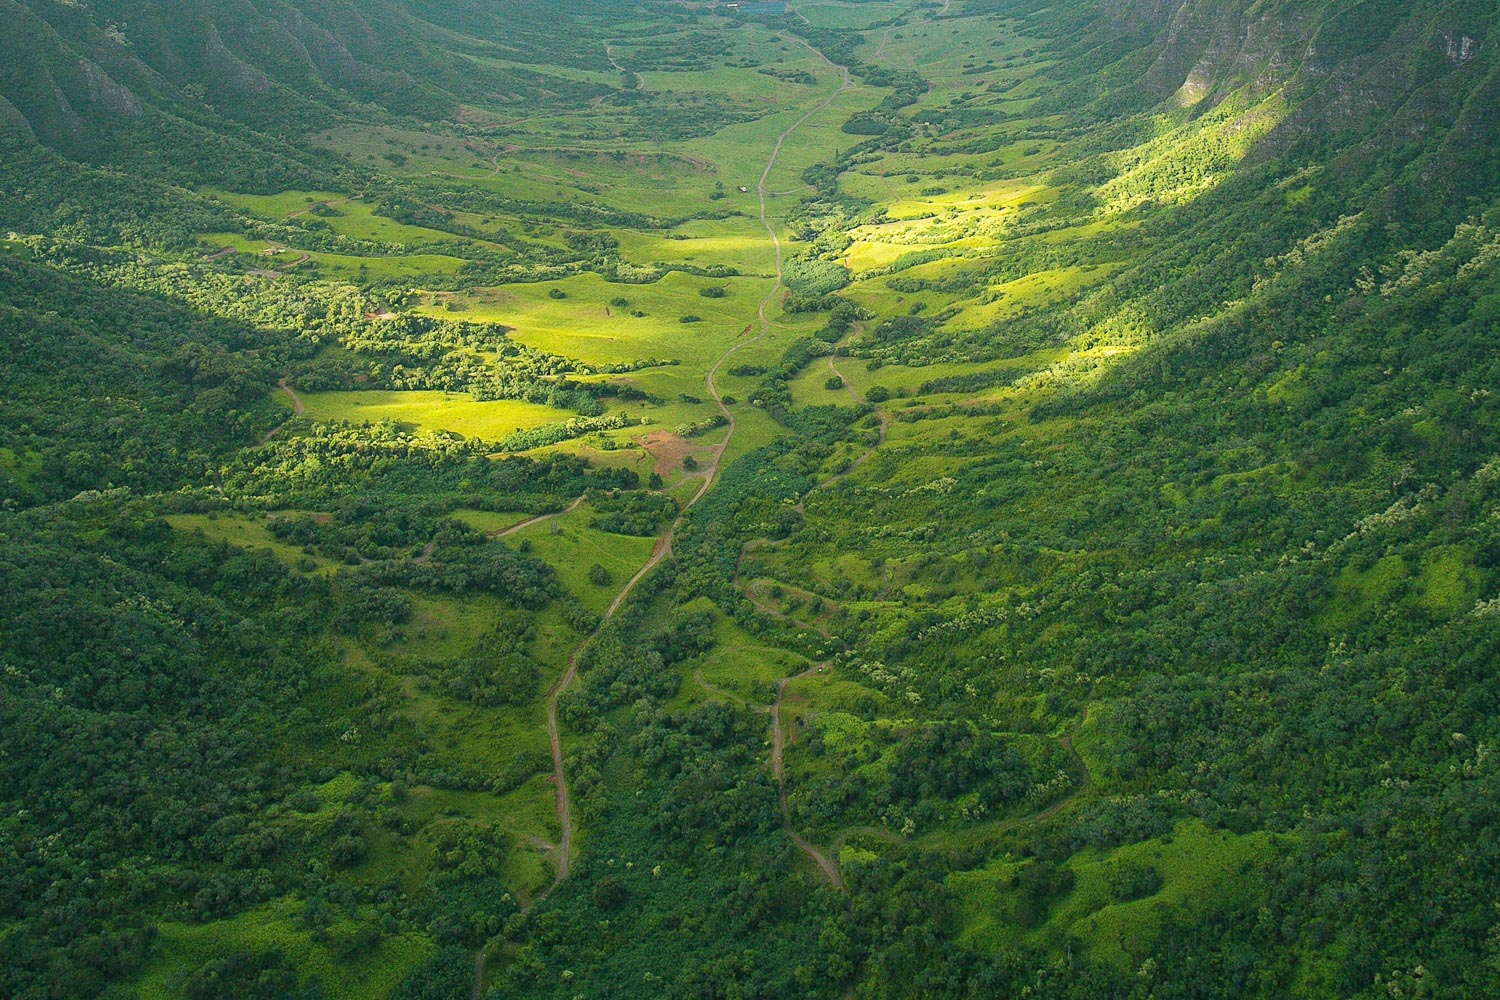 Kualoa Ranch views from a helicopter